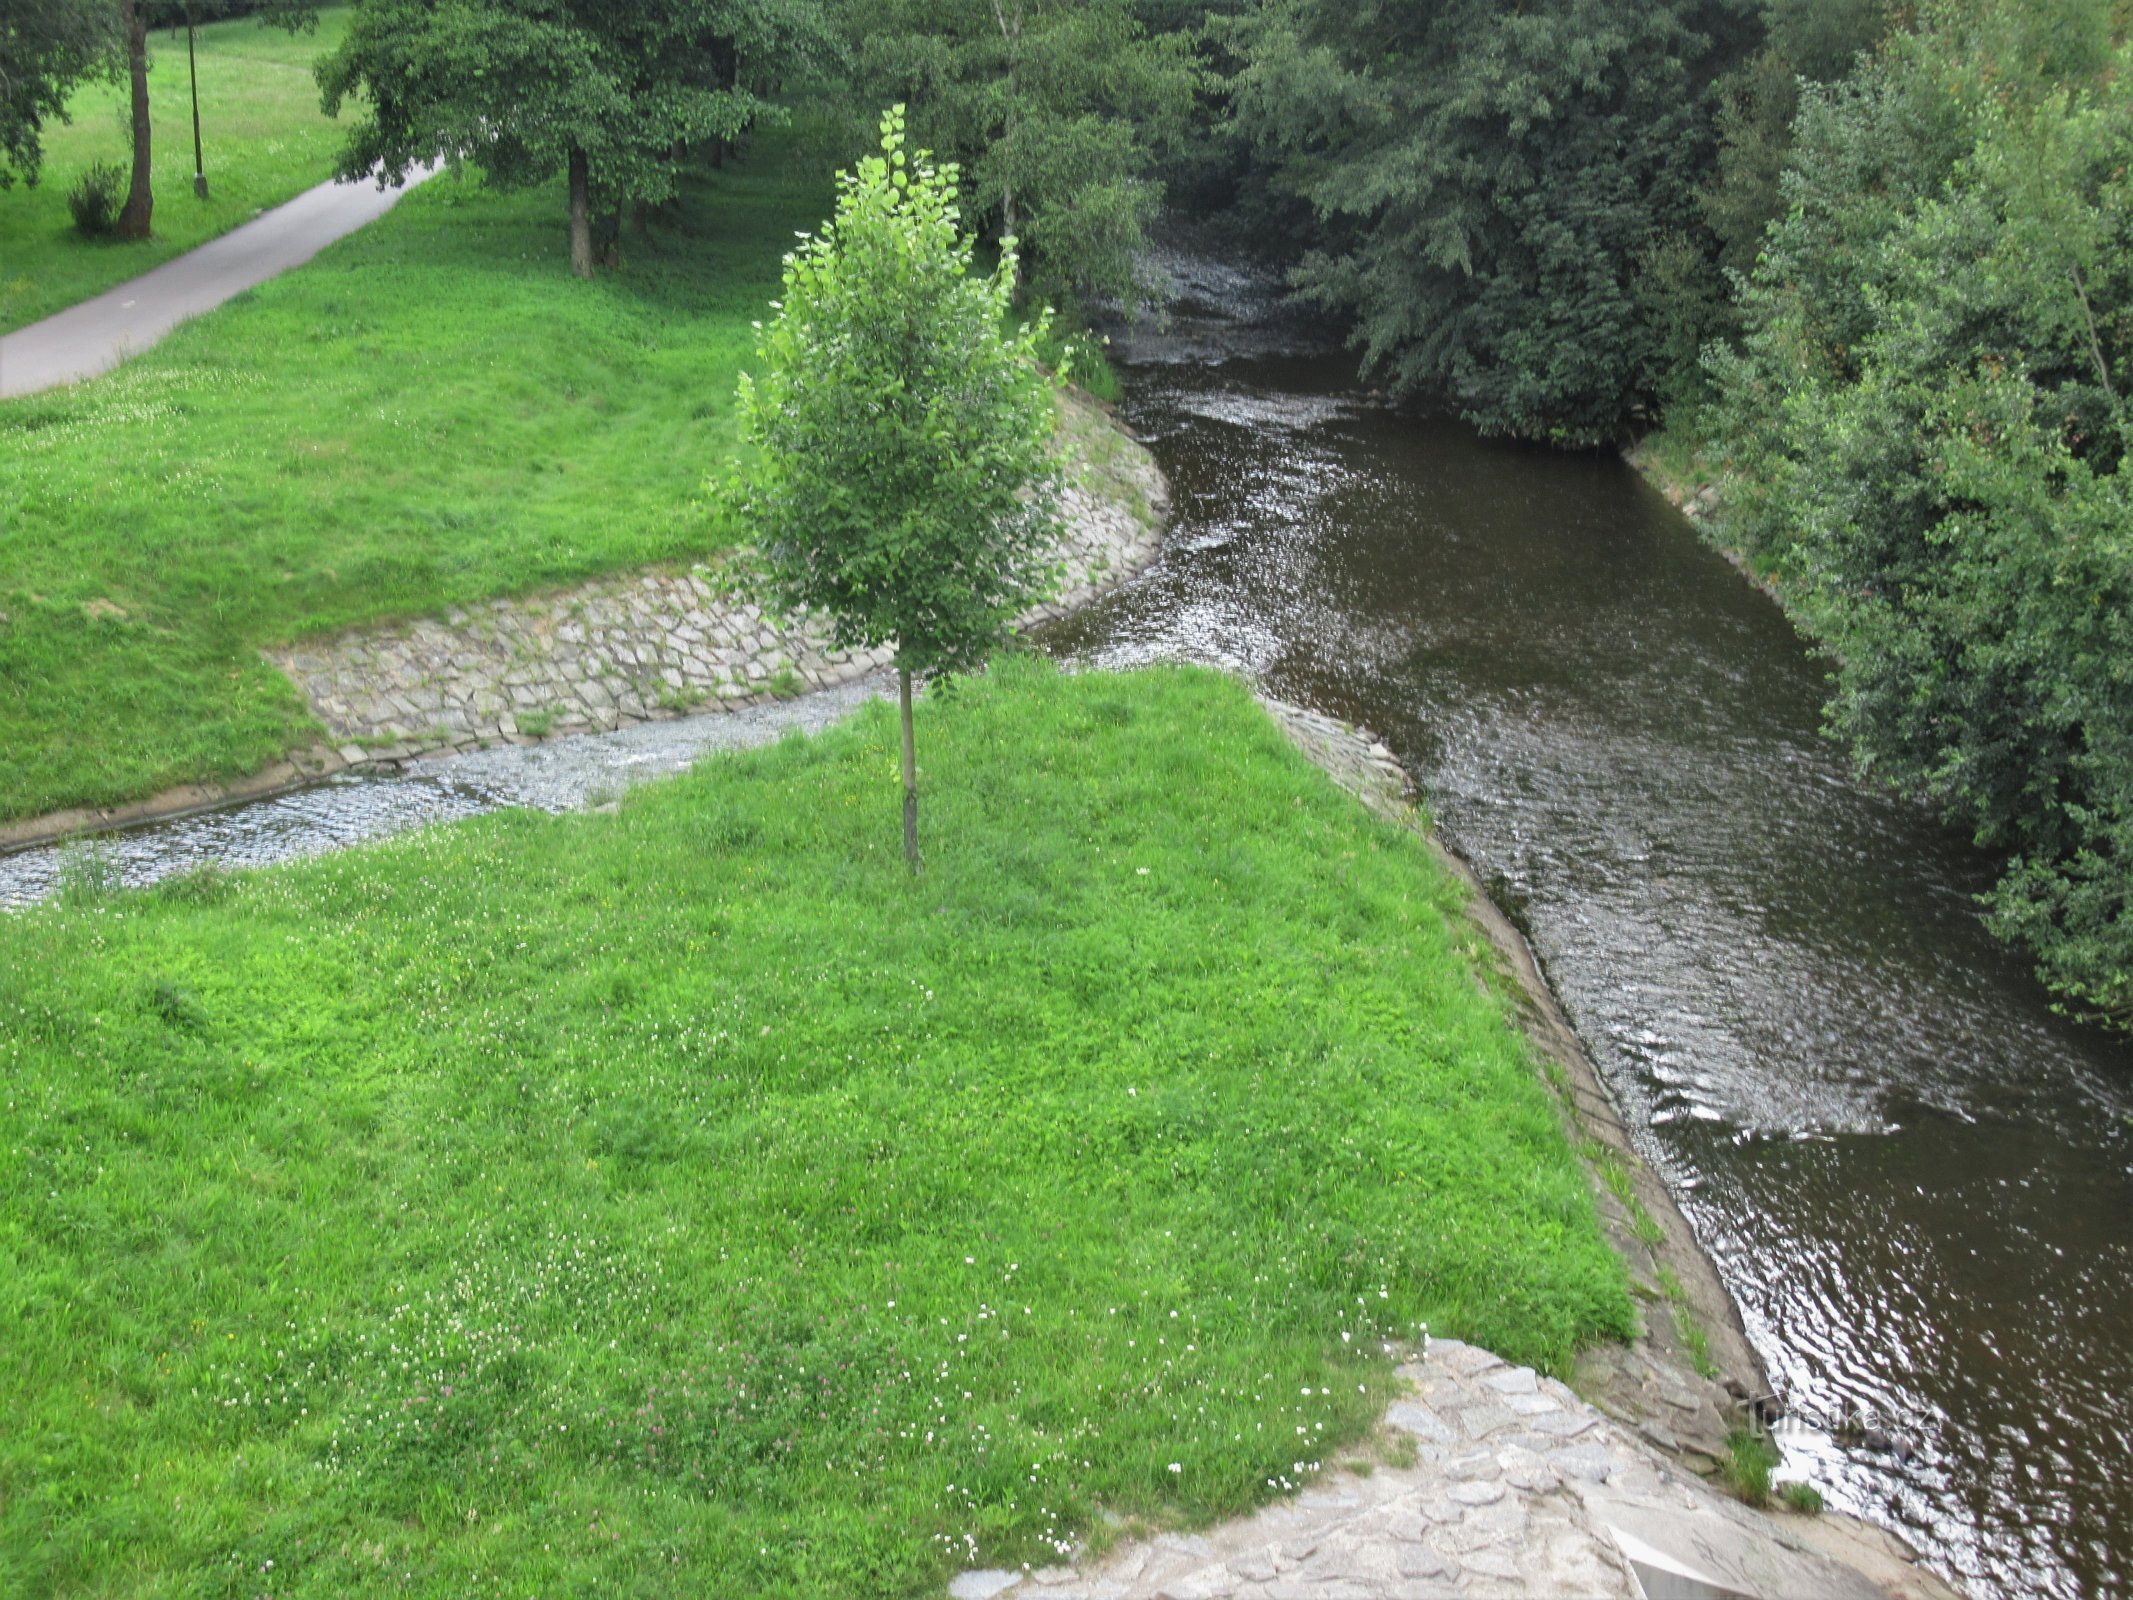 The confluence of the Sázava - on the right and the Stavišťské stream - on the left